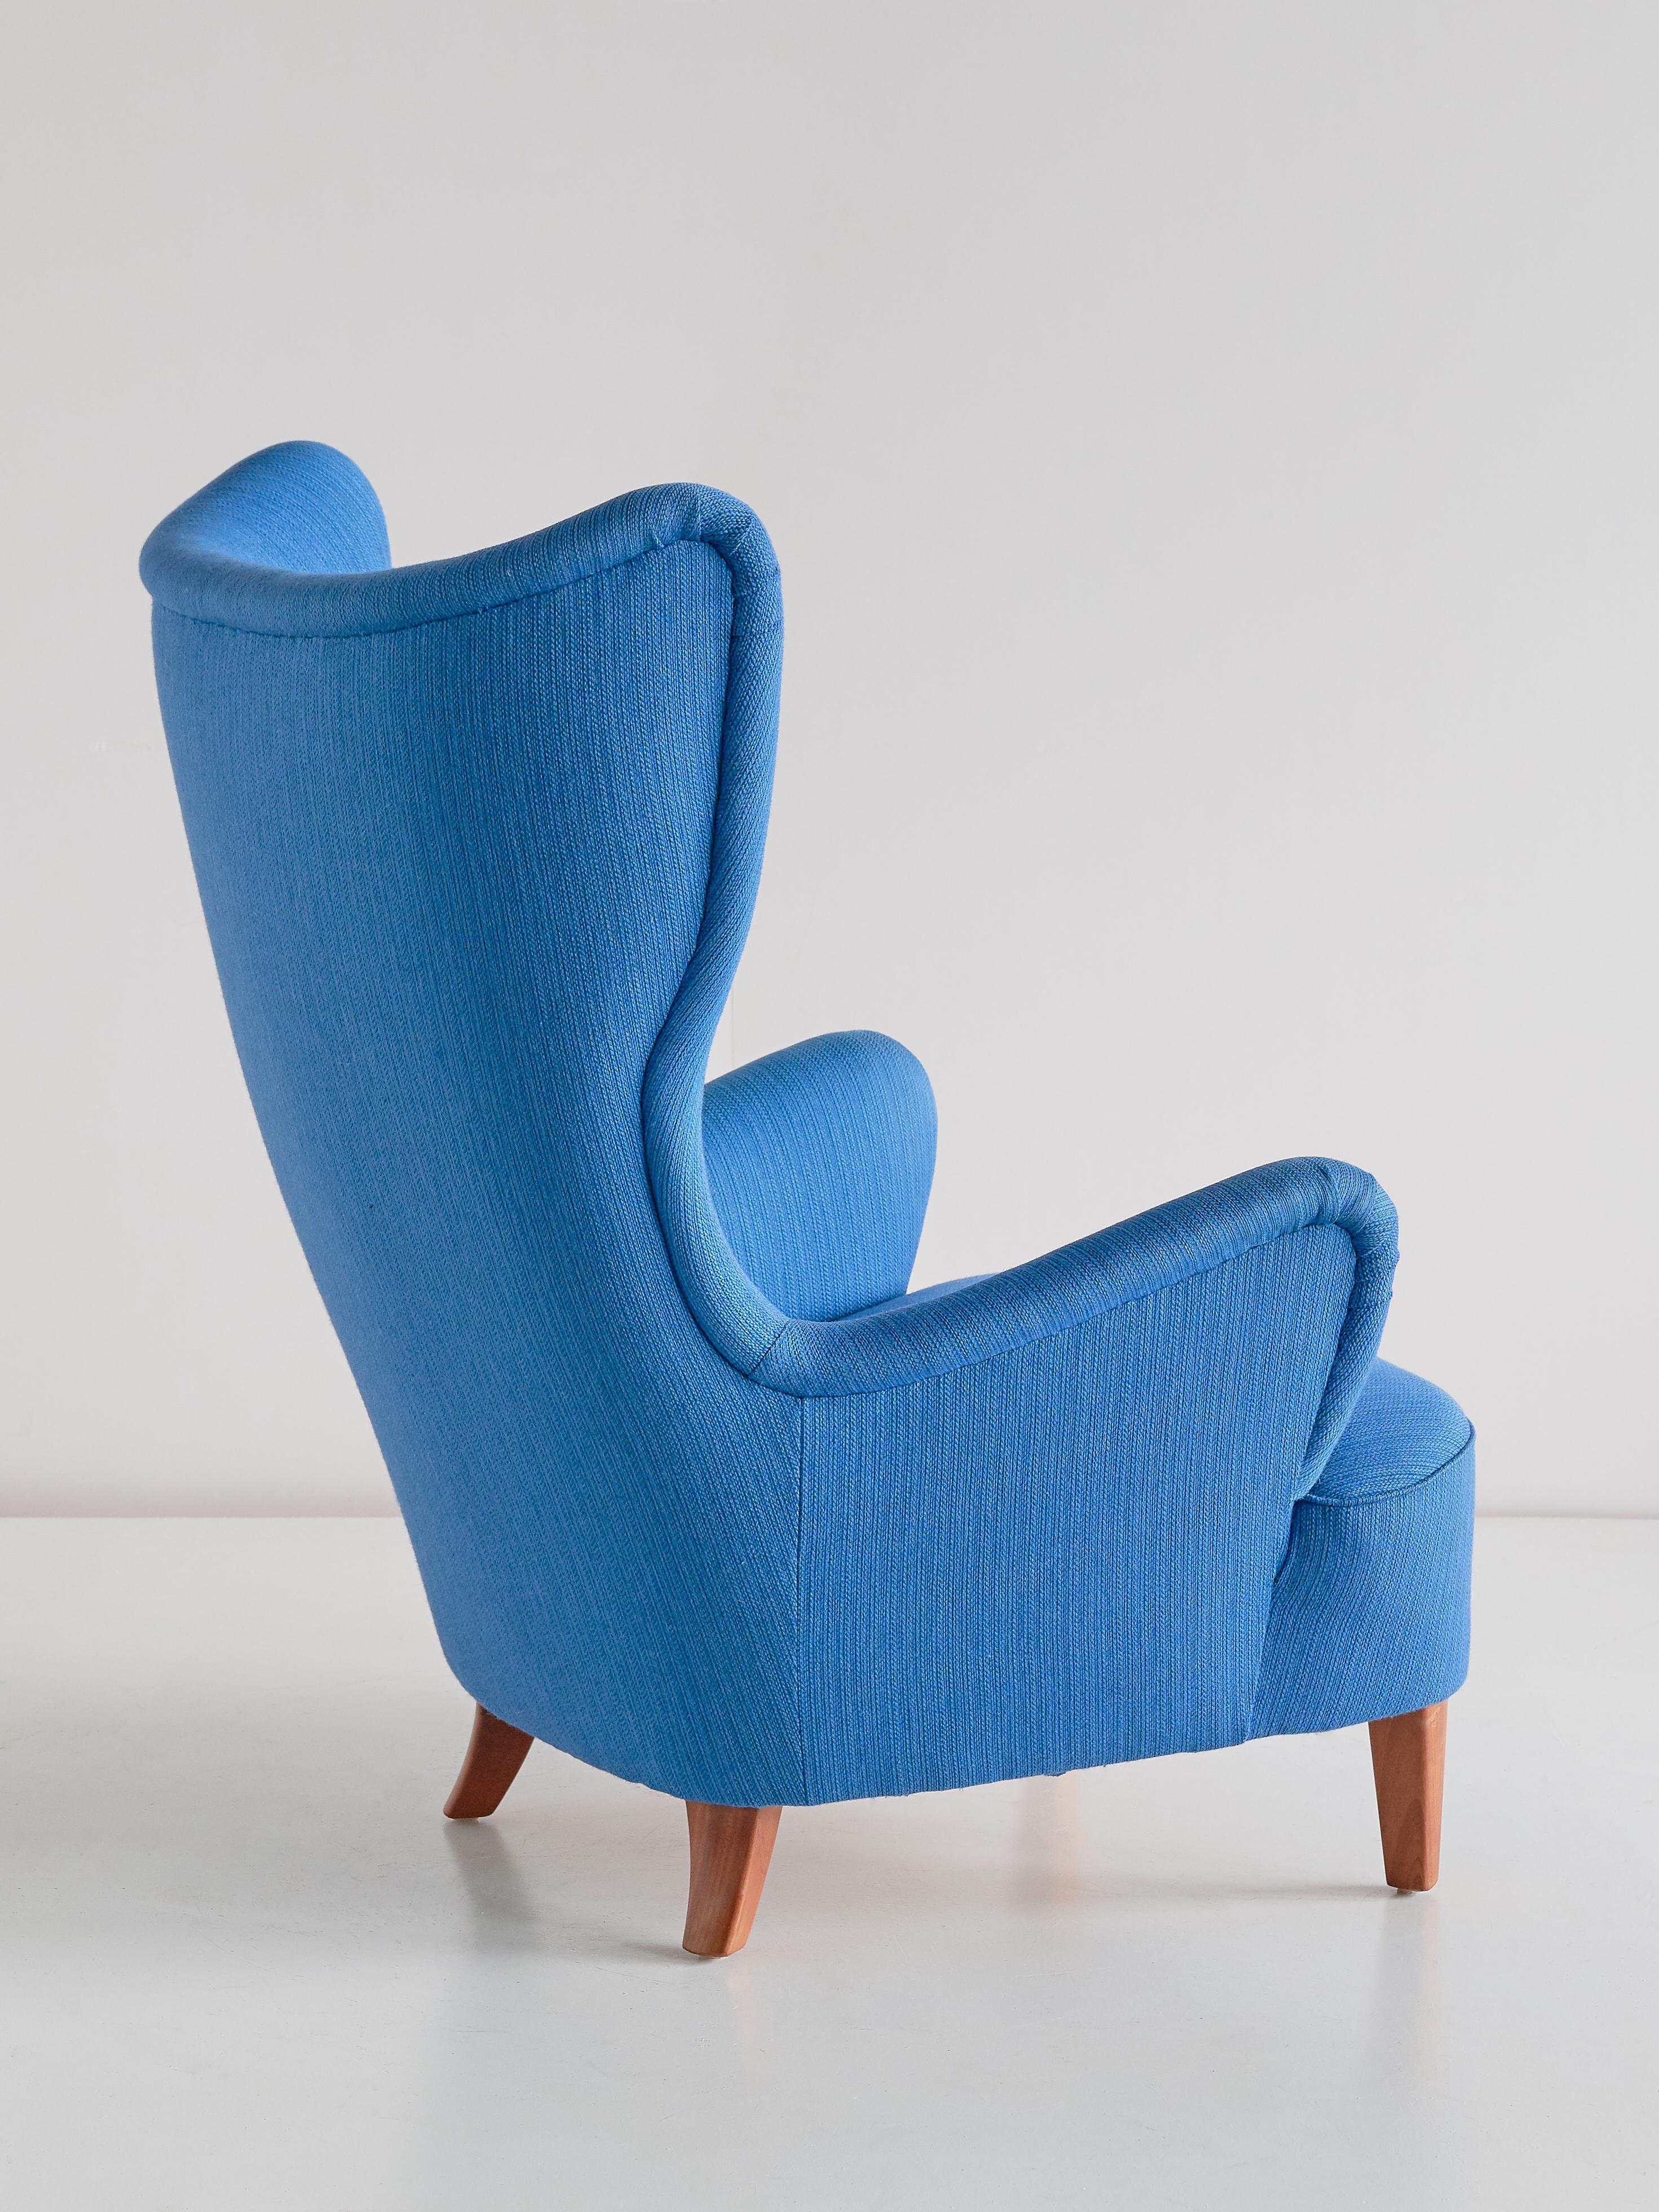 Scandinavian Modern Arne Färnrot Wingback Chair in Blue Wool Fabric and Mahogany, Sweden, Late 1940s